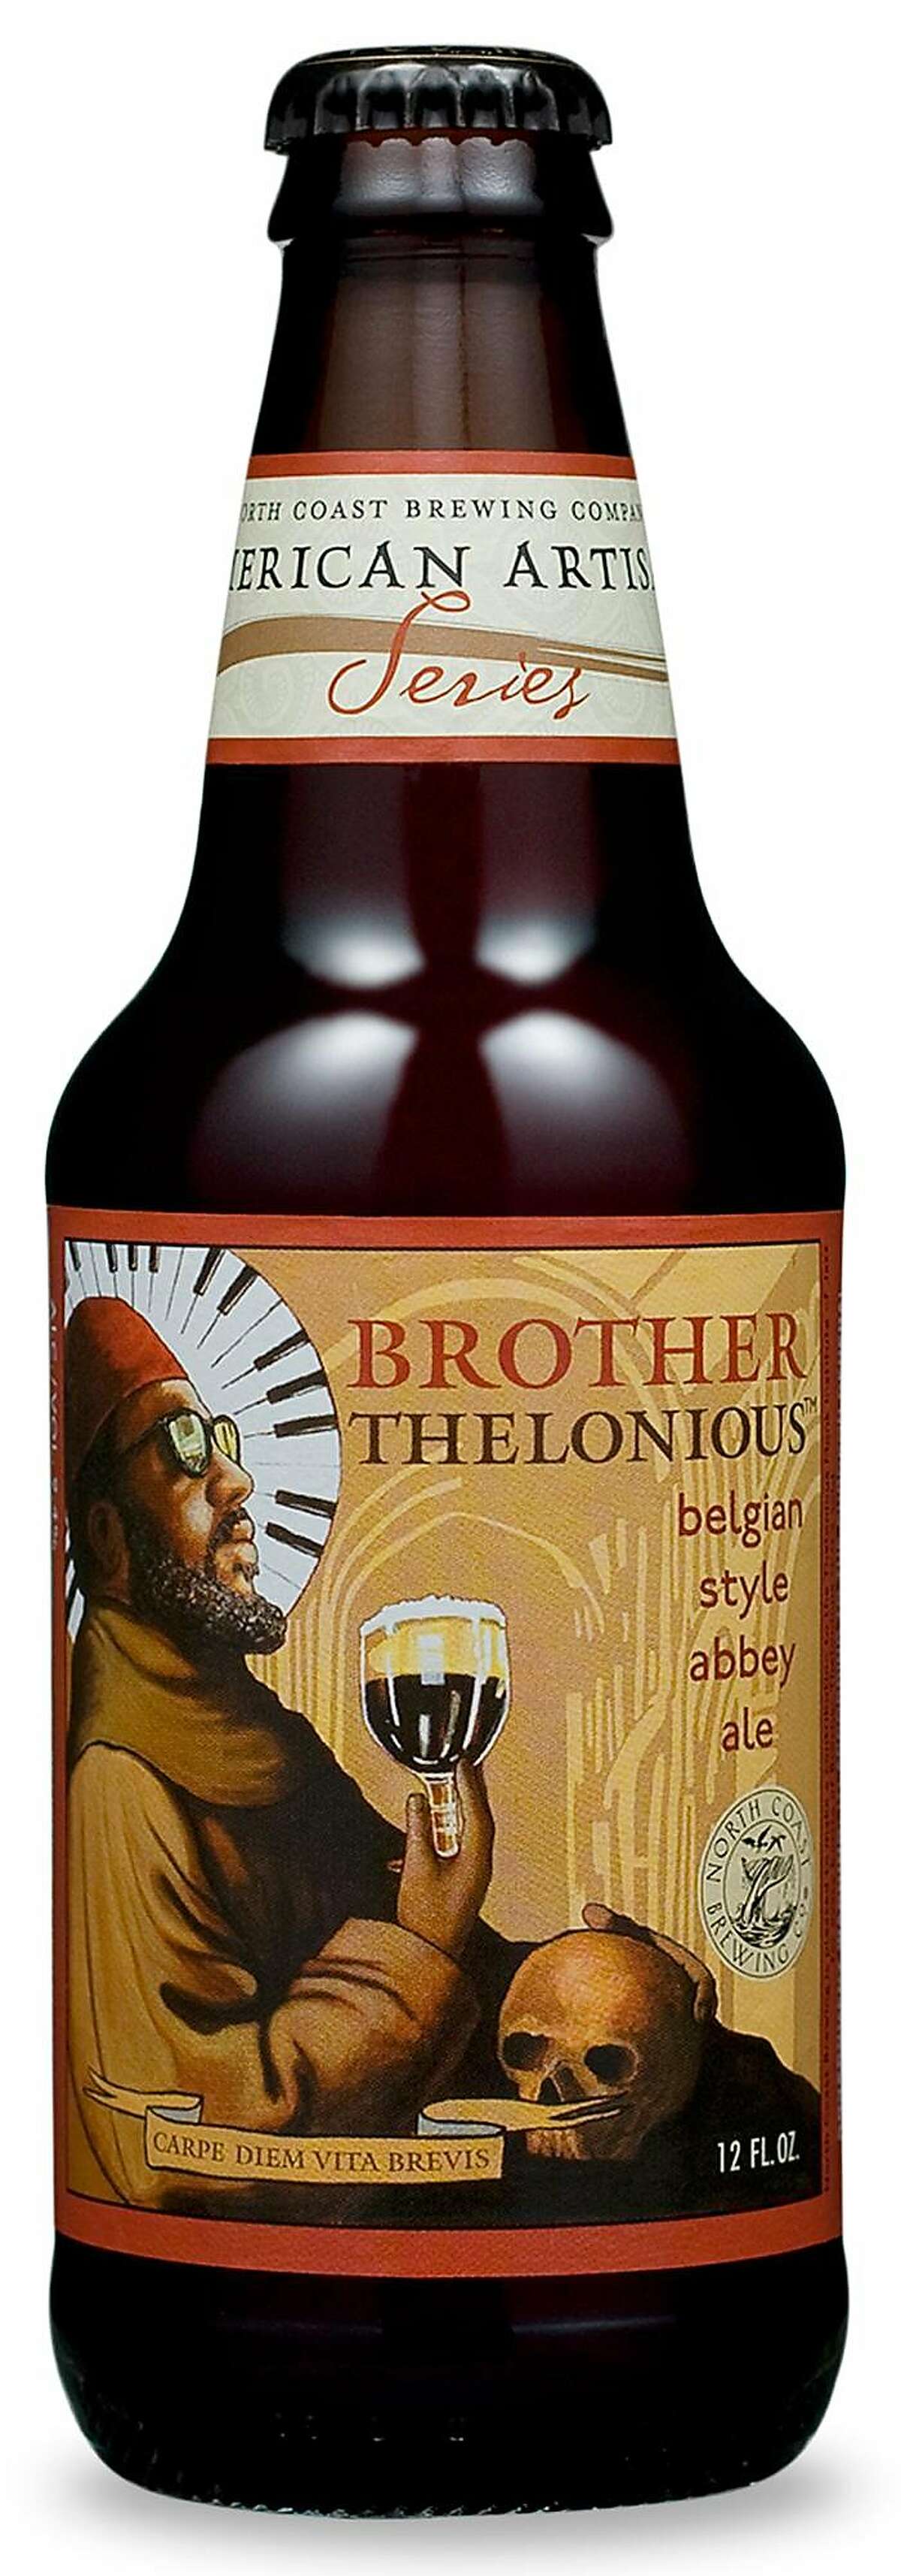 A 12-oz bottle of Brother Thelonious from North Coast Brewing Co.